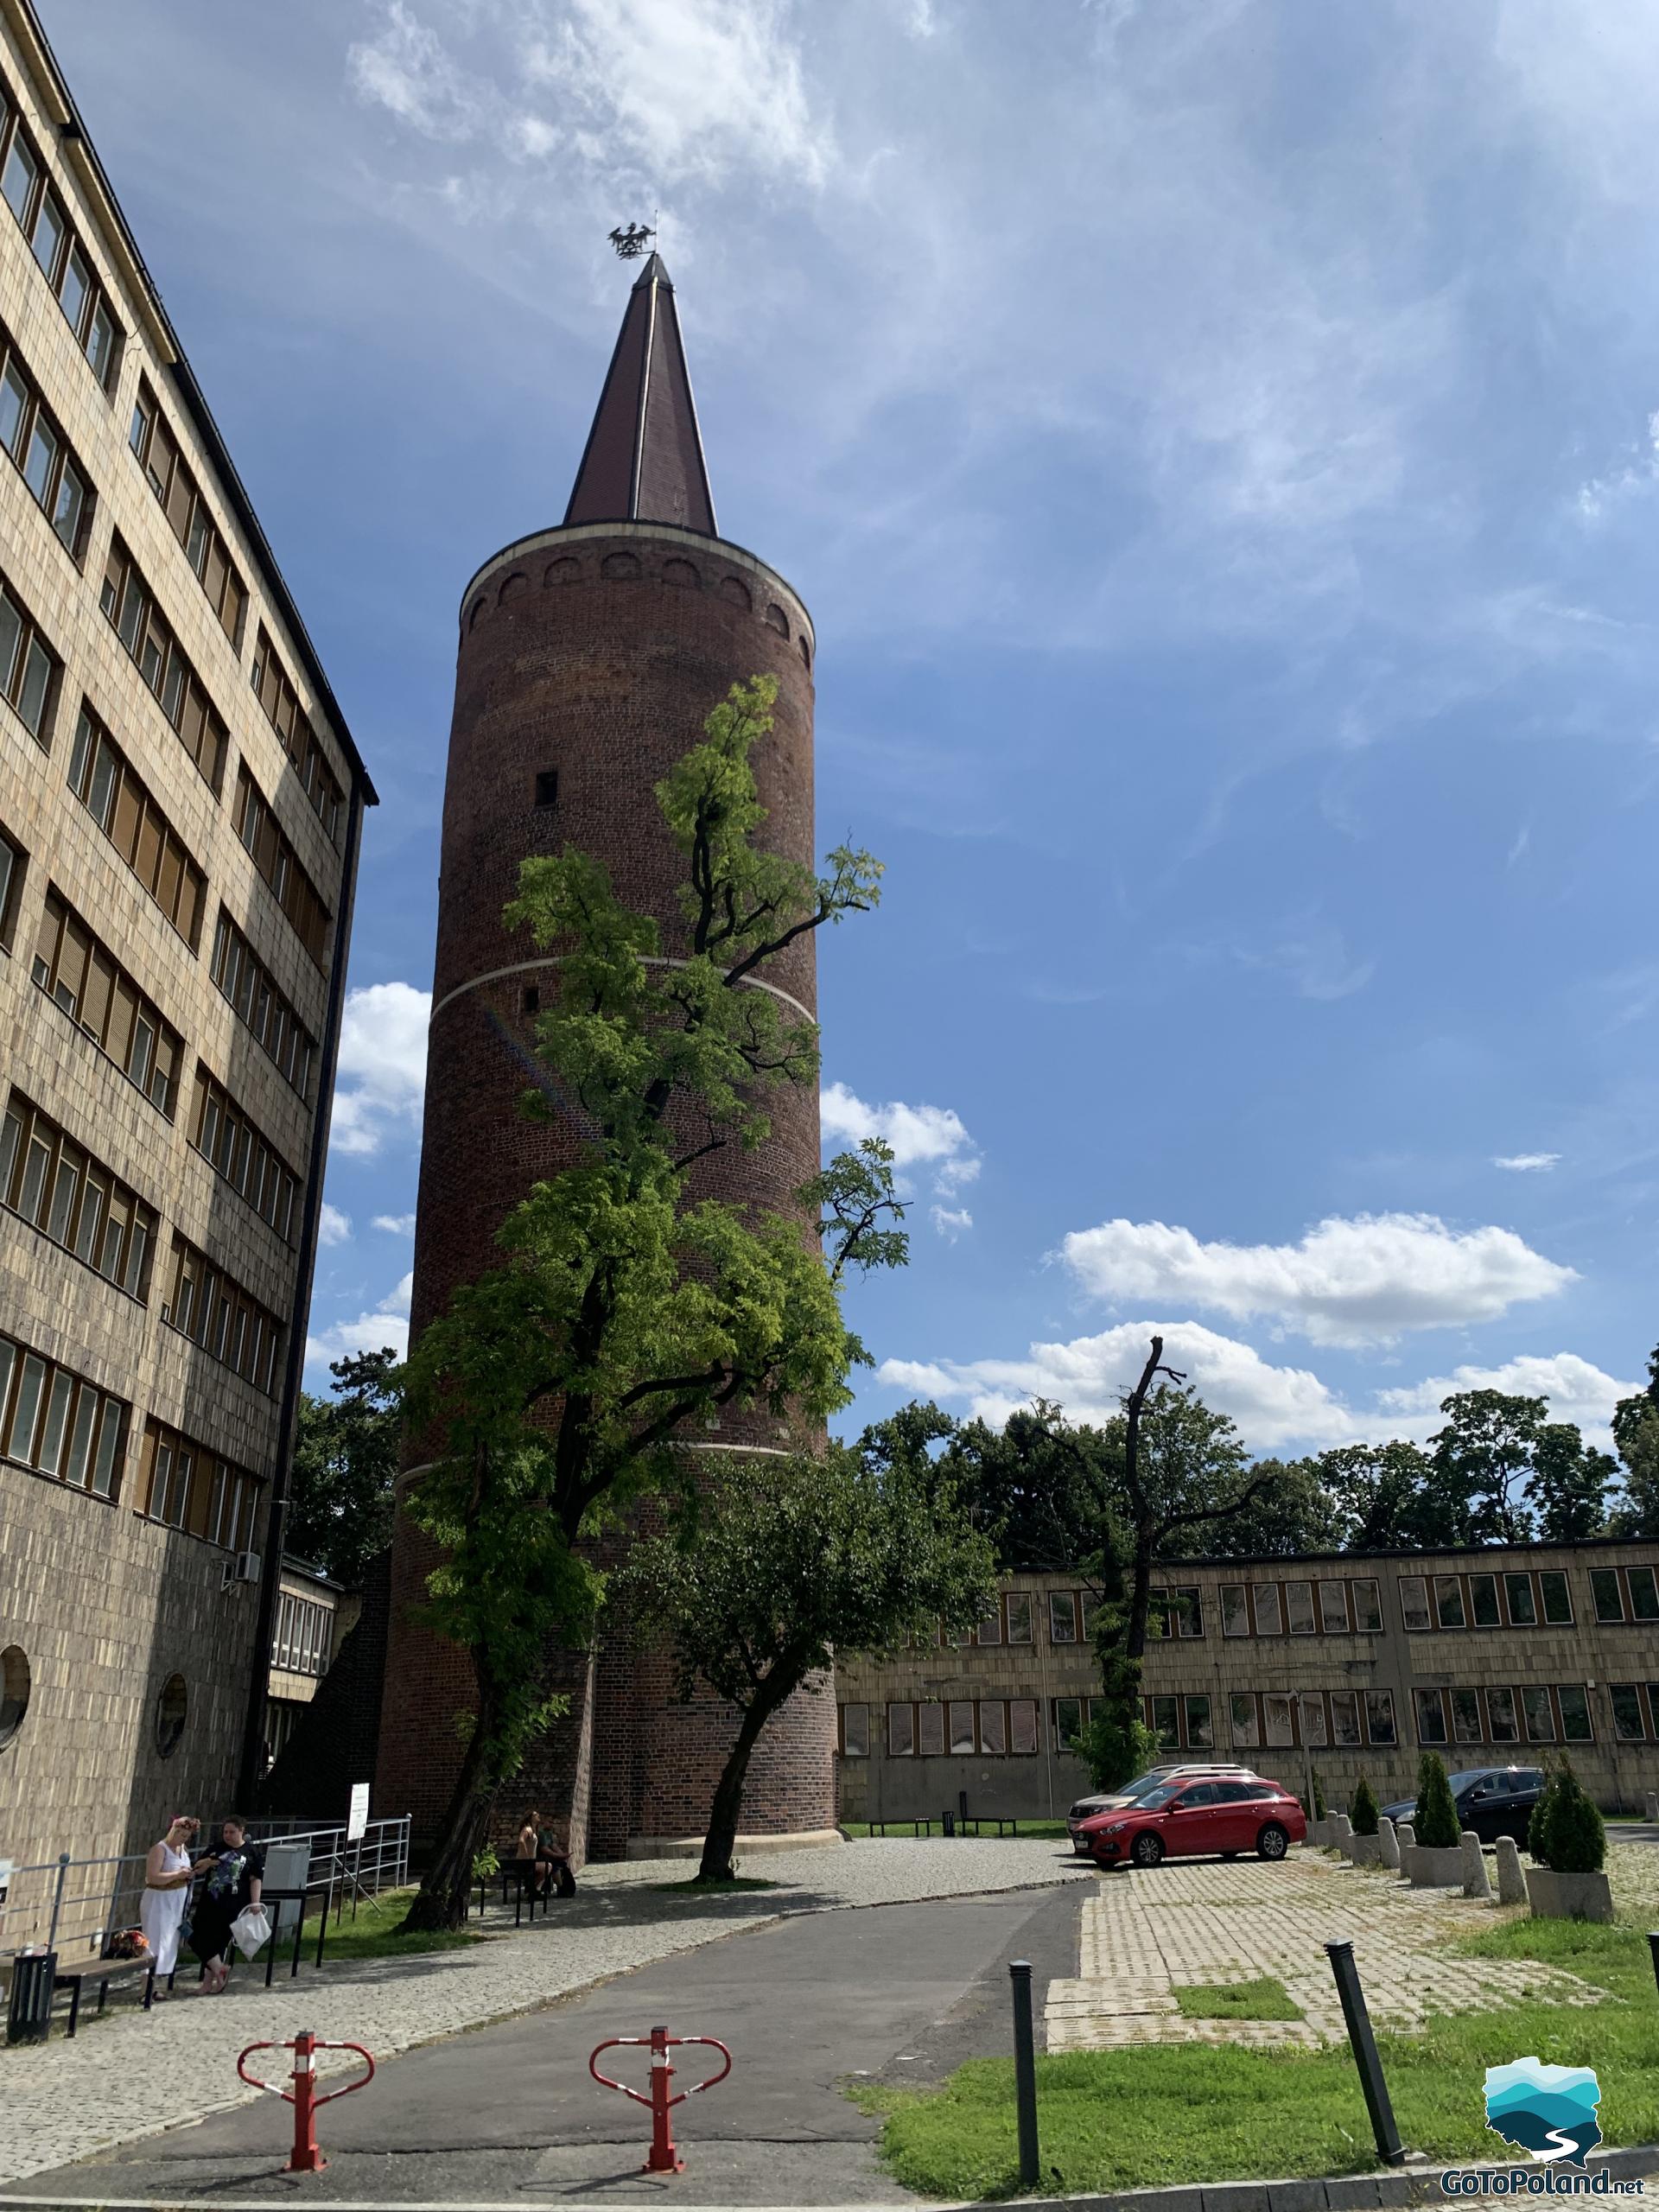 the Piast Tower made of red brick